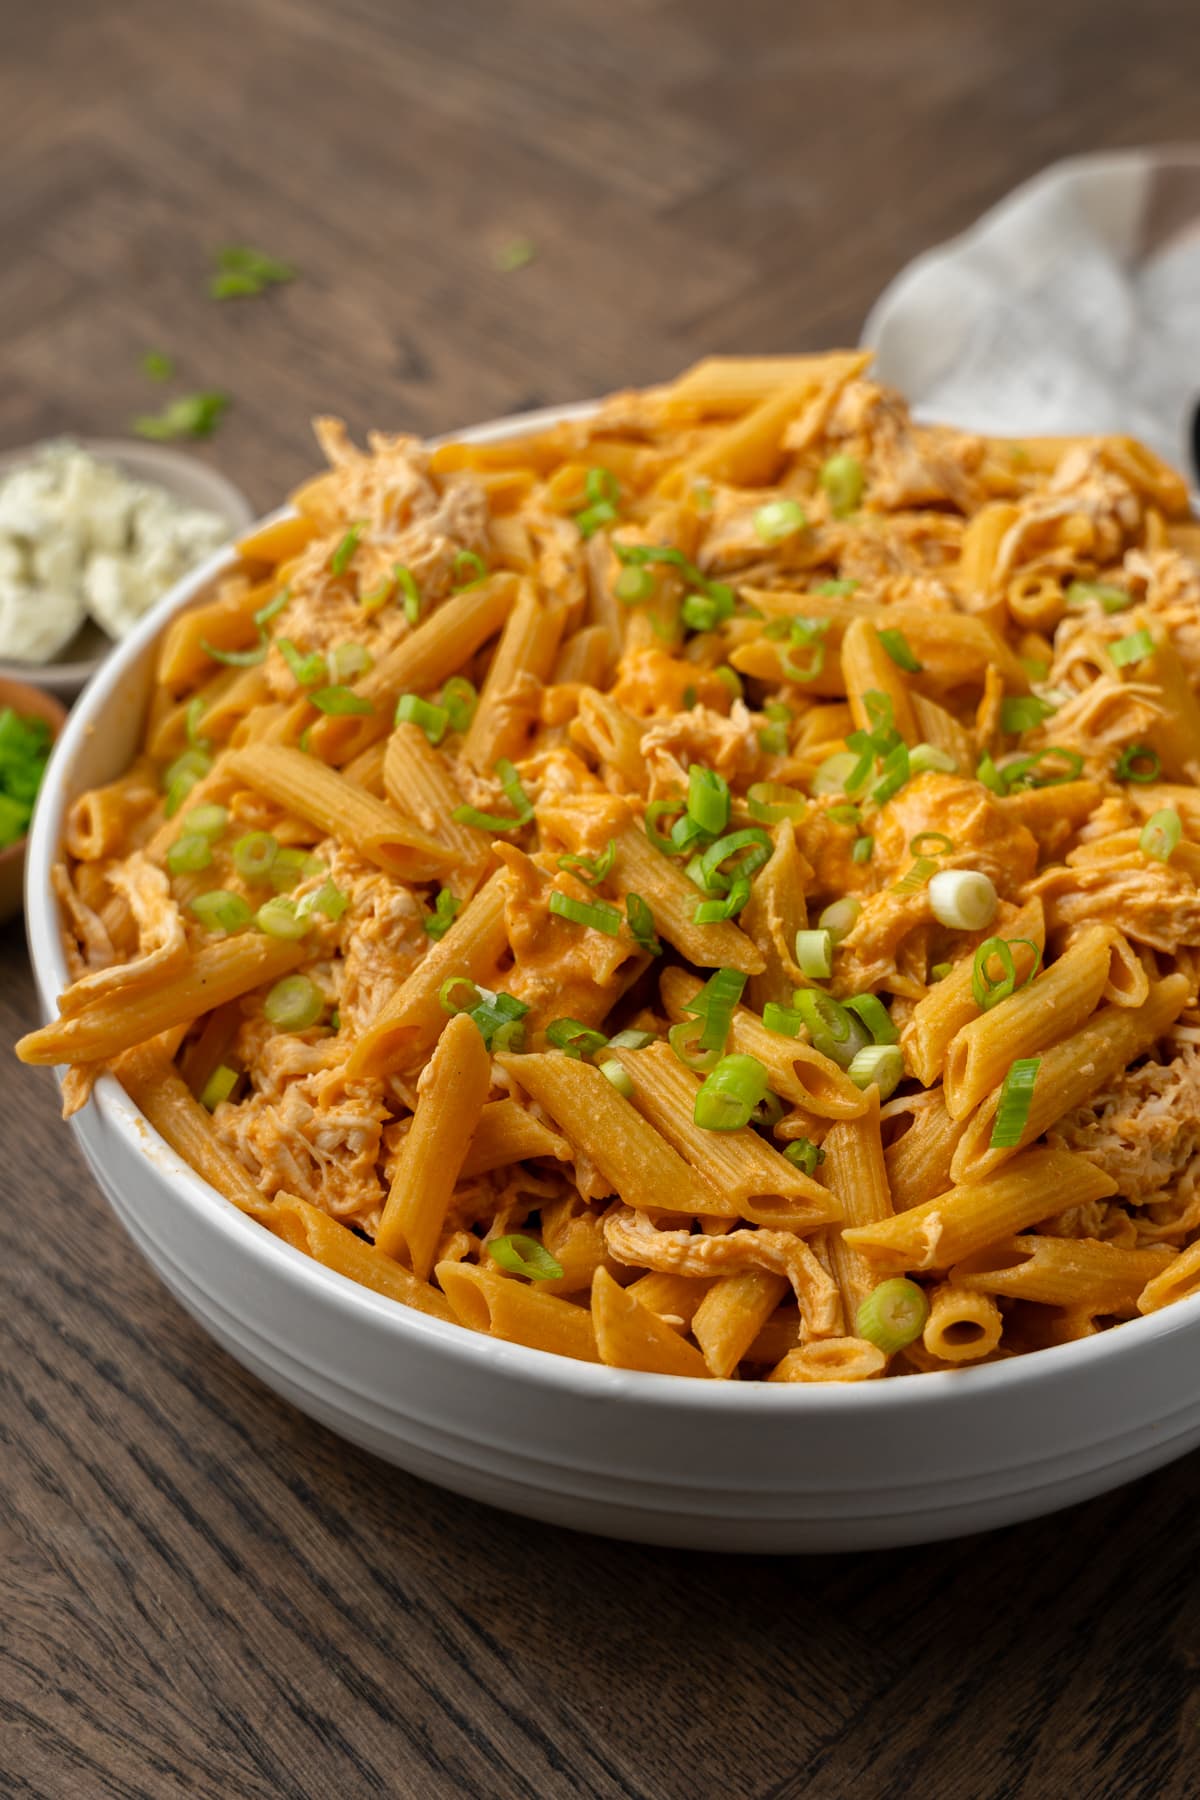 Buffalo chicken pasta topped with thinly sliced green onions.